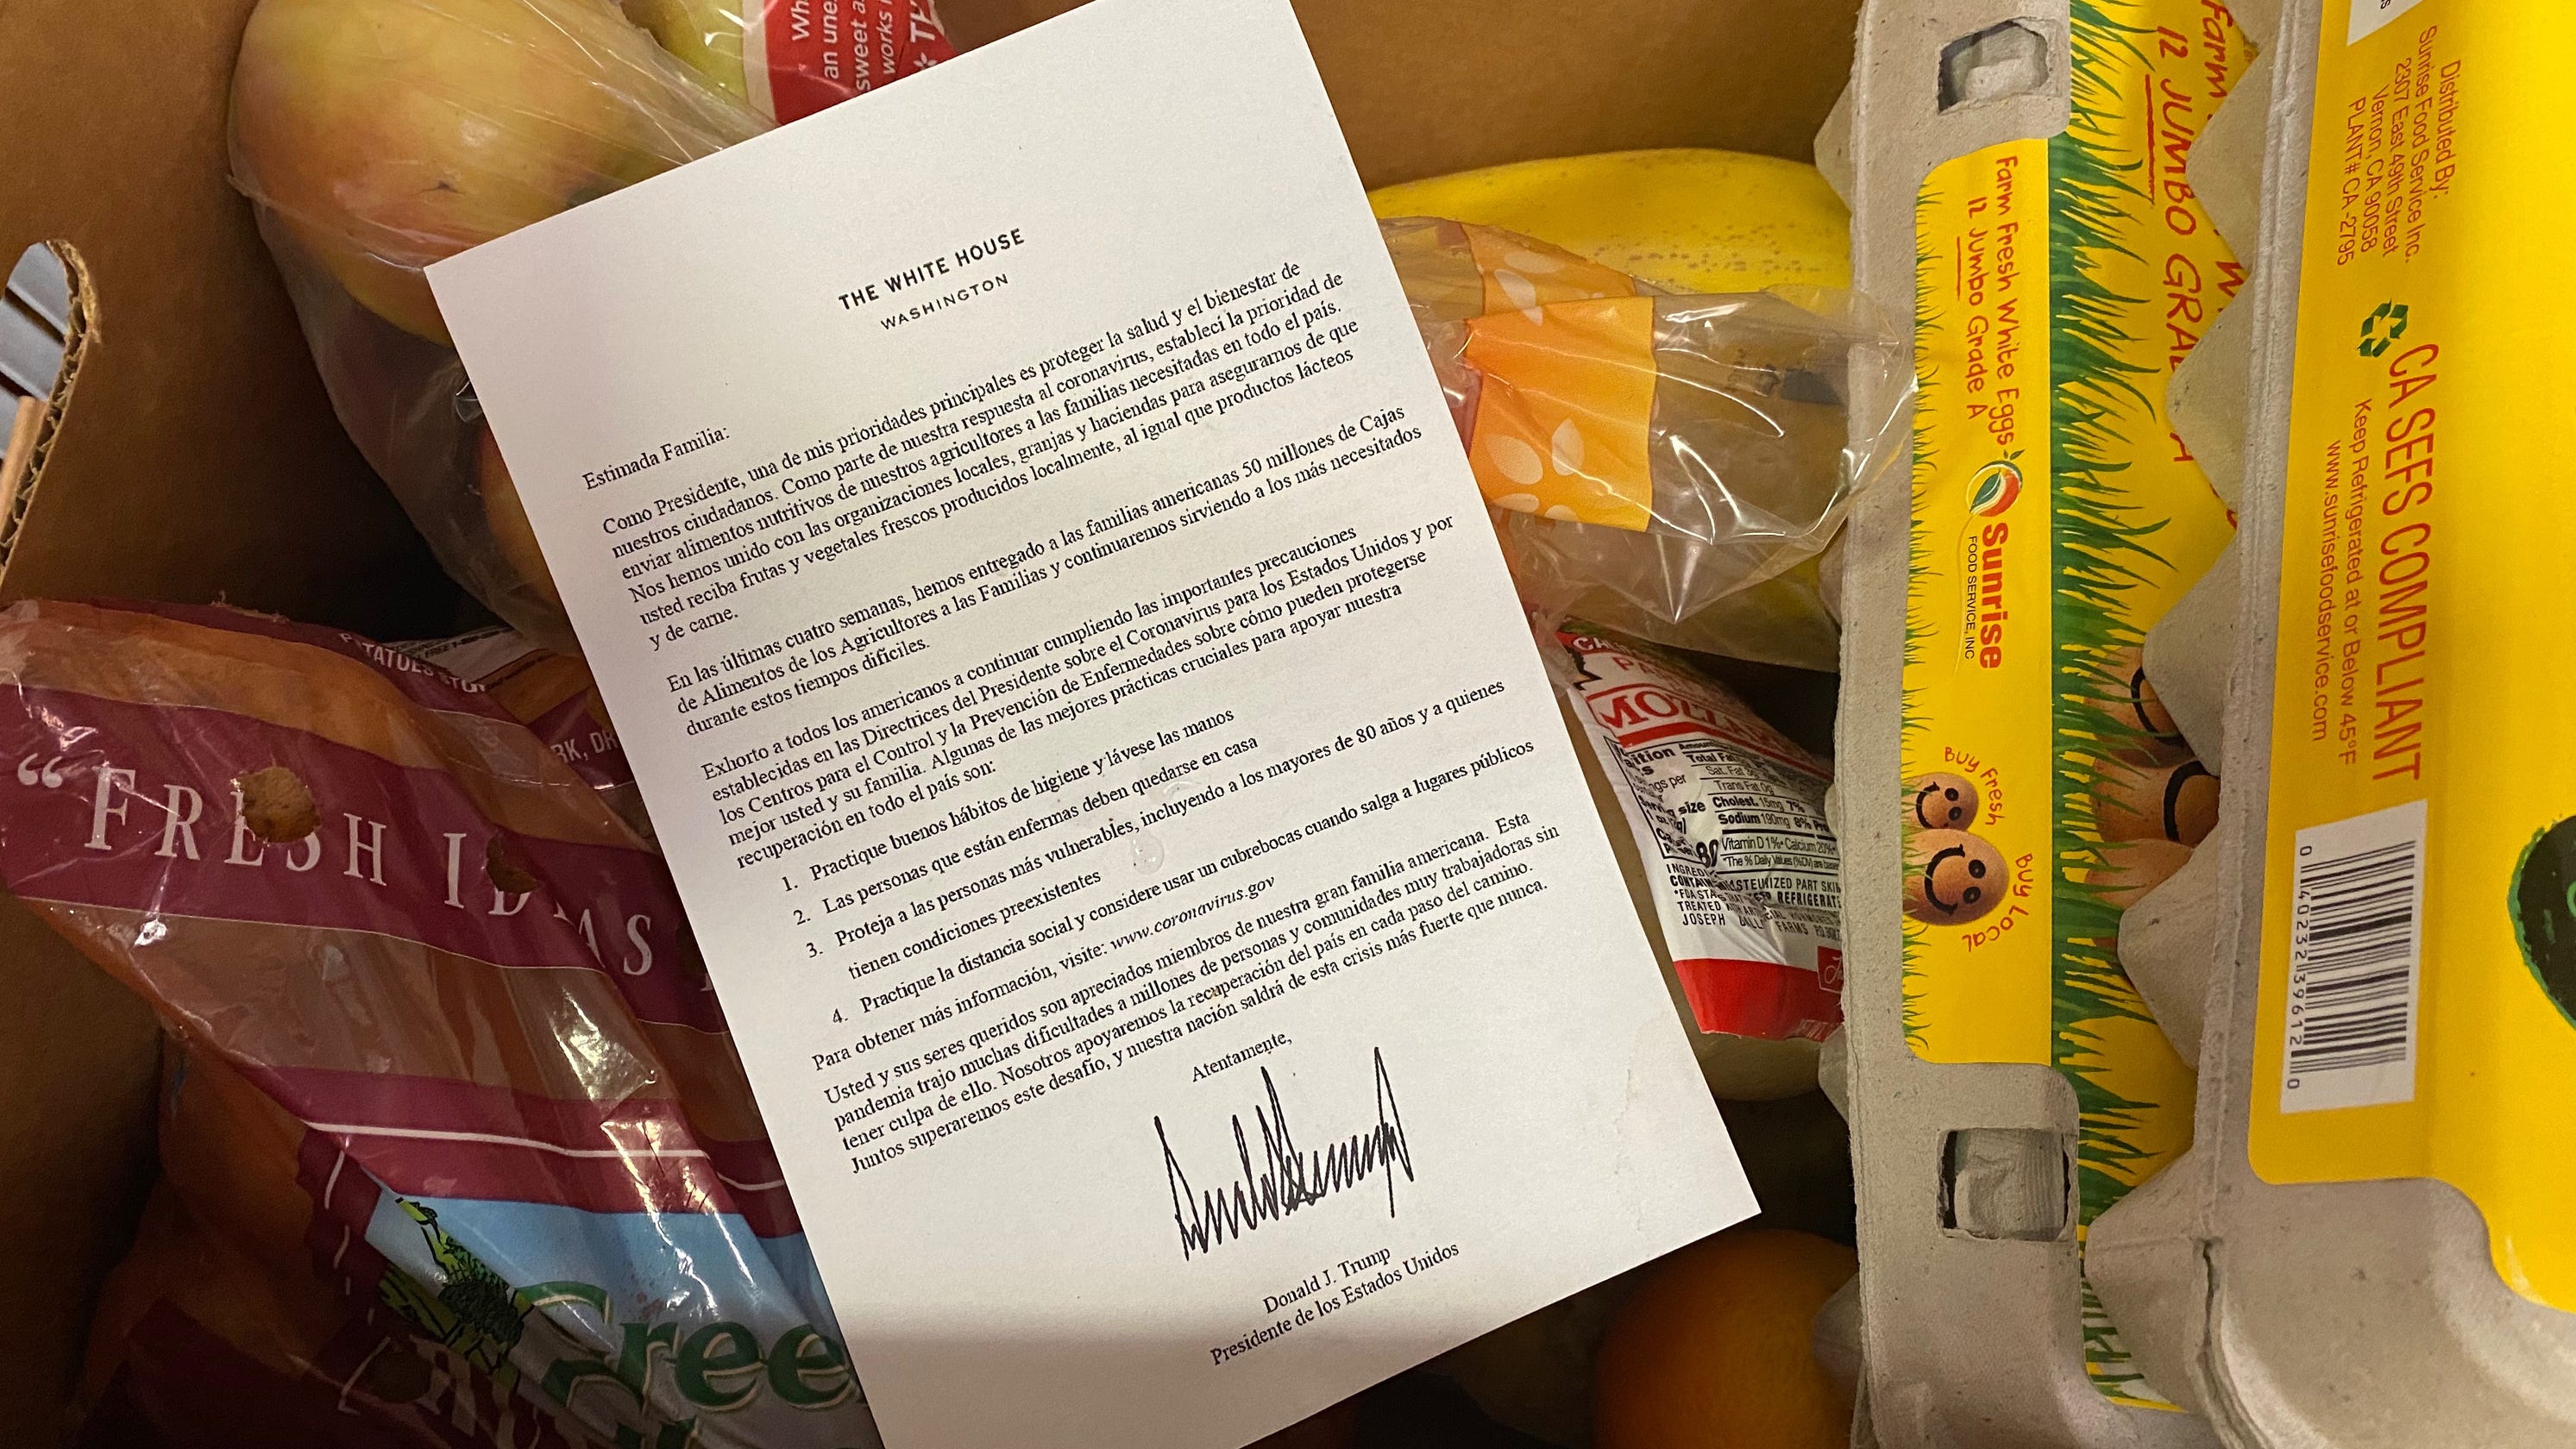 Nonprofit responds to food boxes including letter signed by Trump